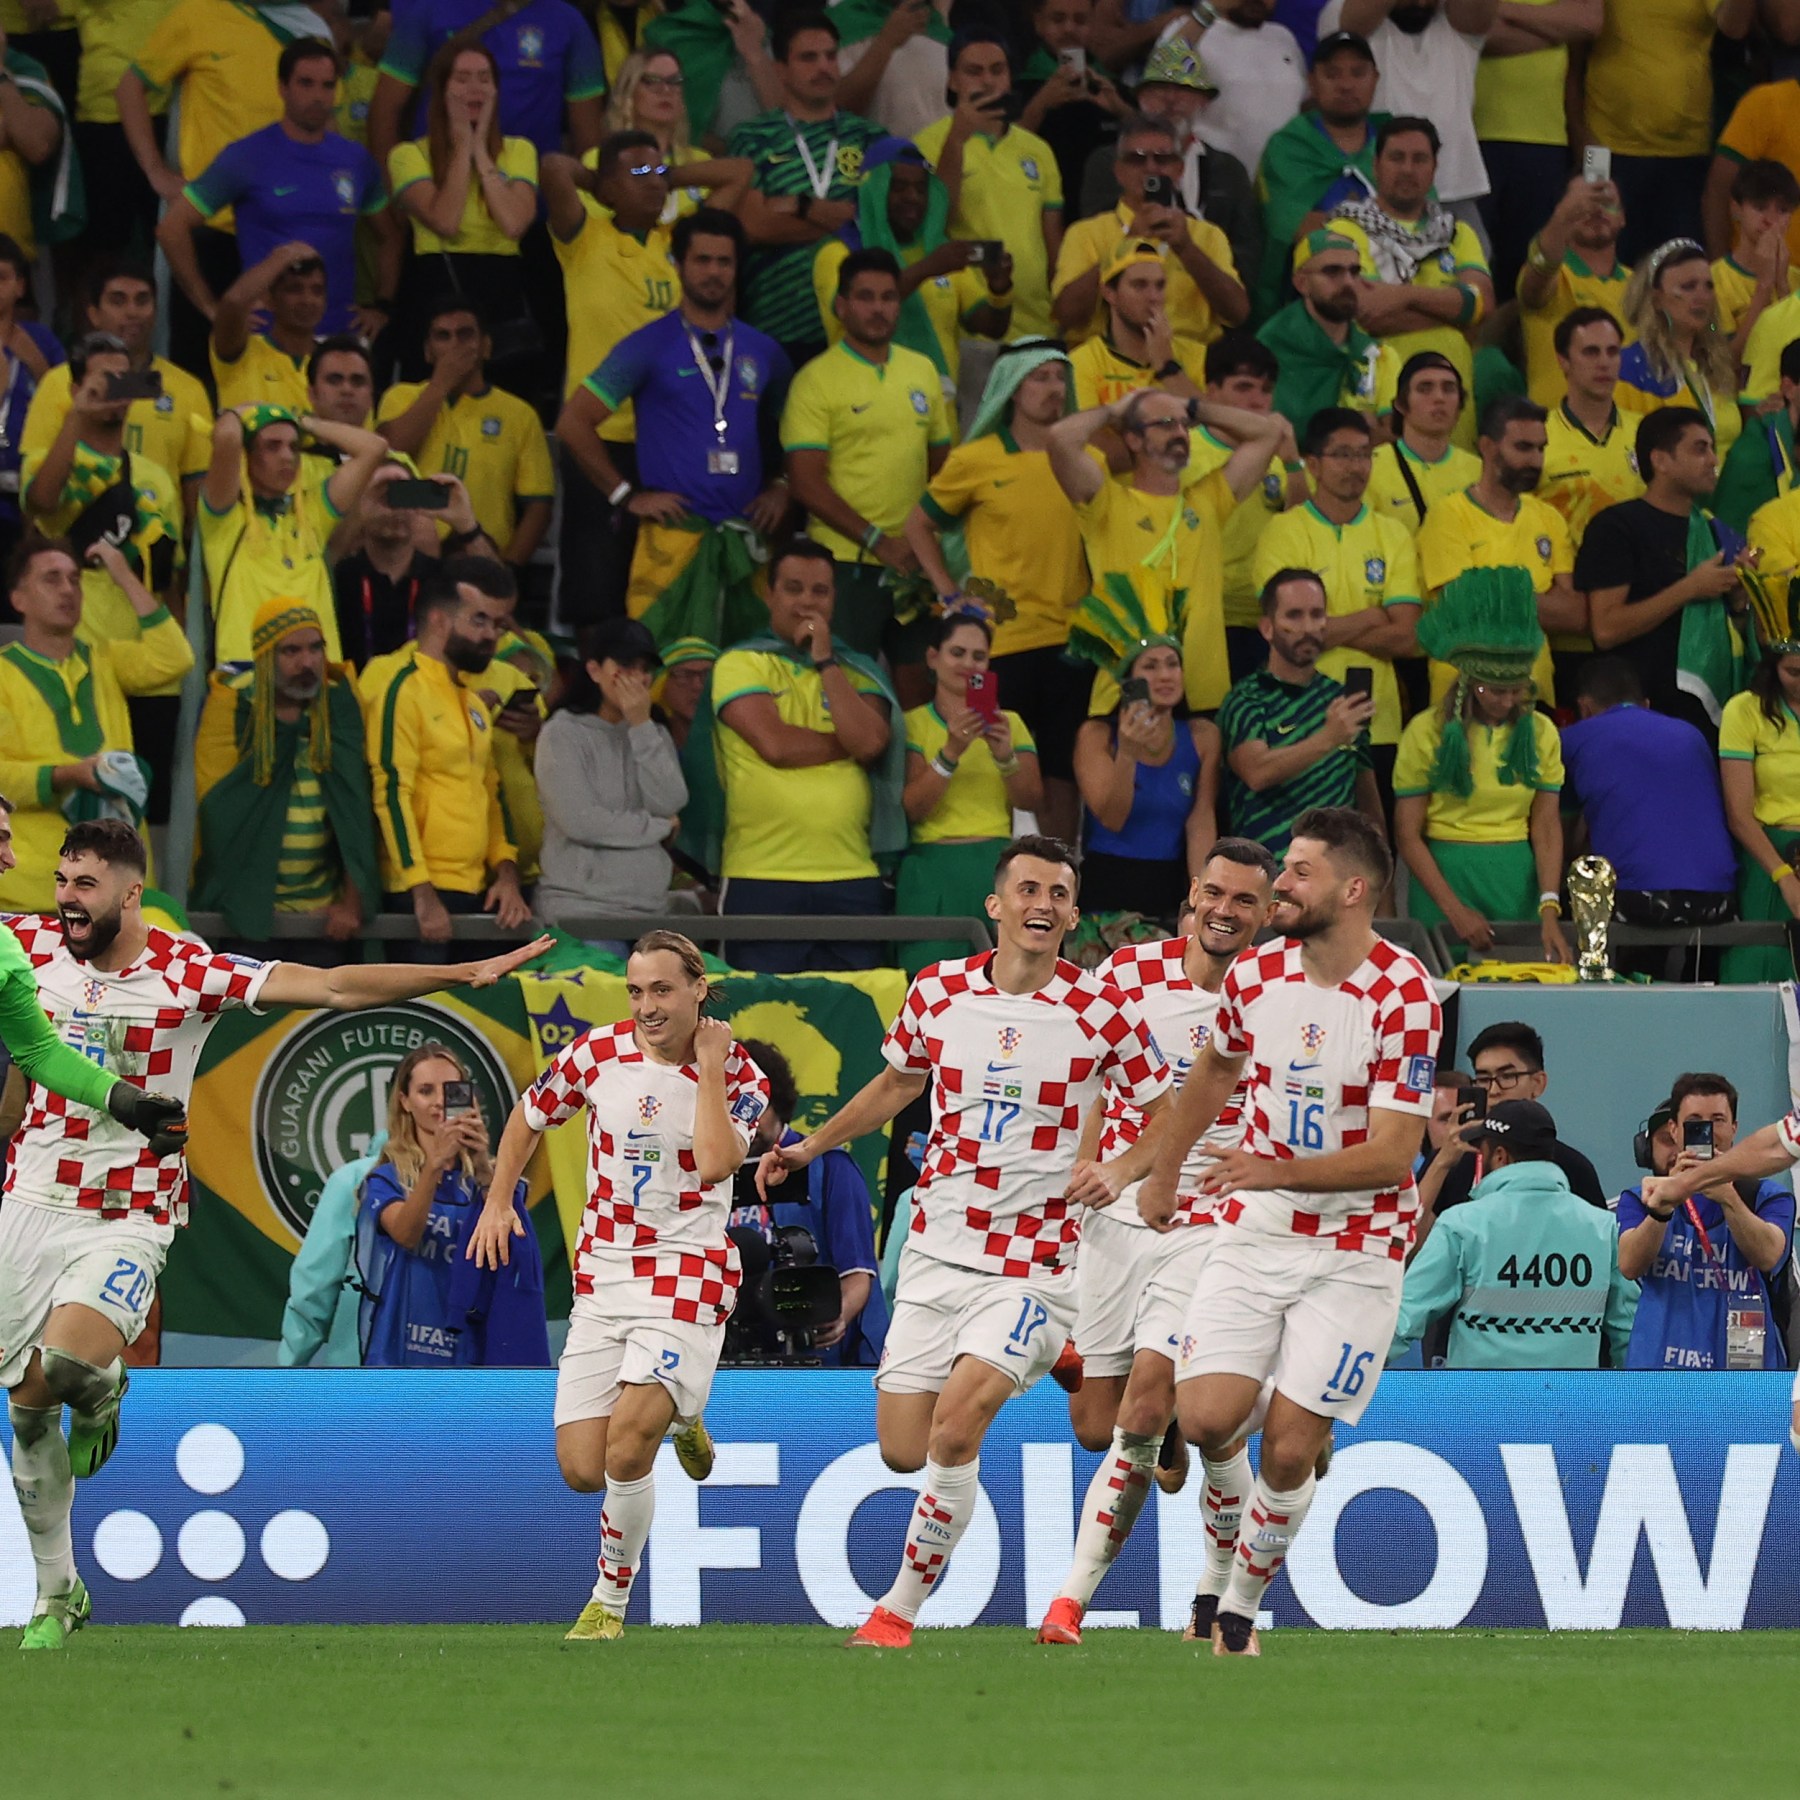 World Cup runners-up Croatia finally in FIFA 23 after 10-year absence